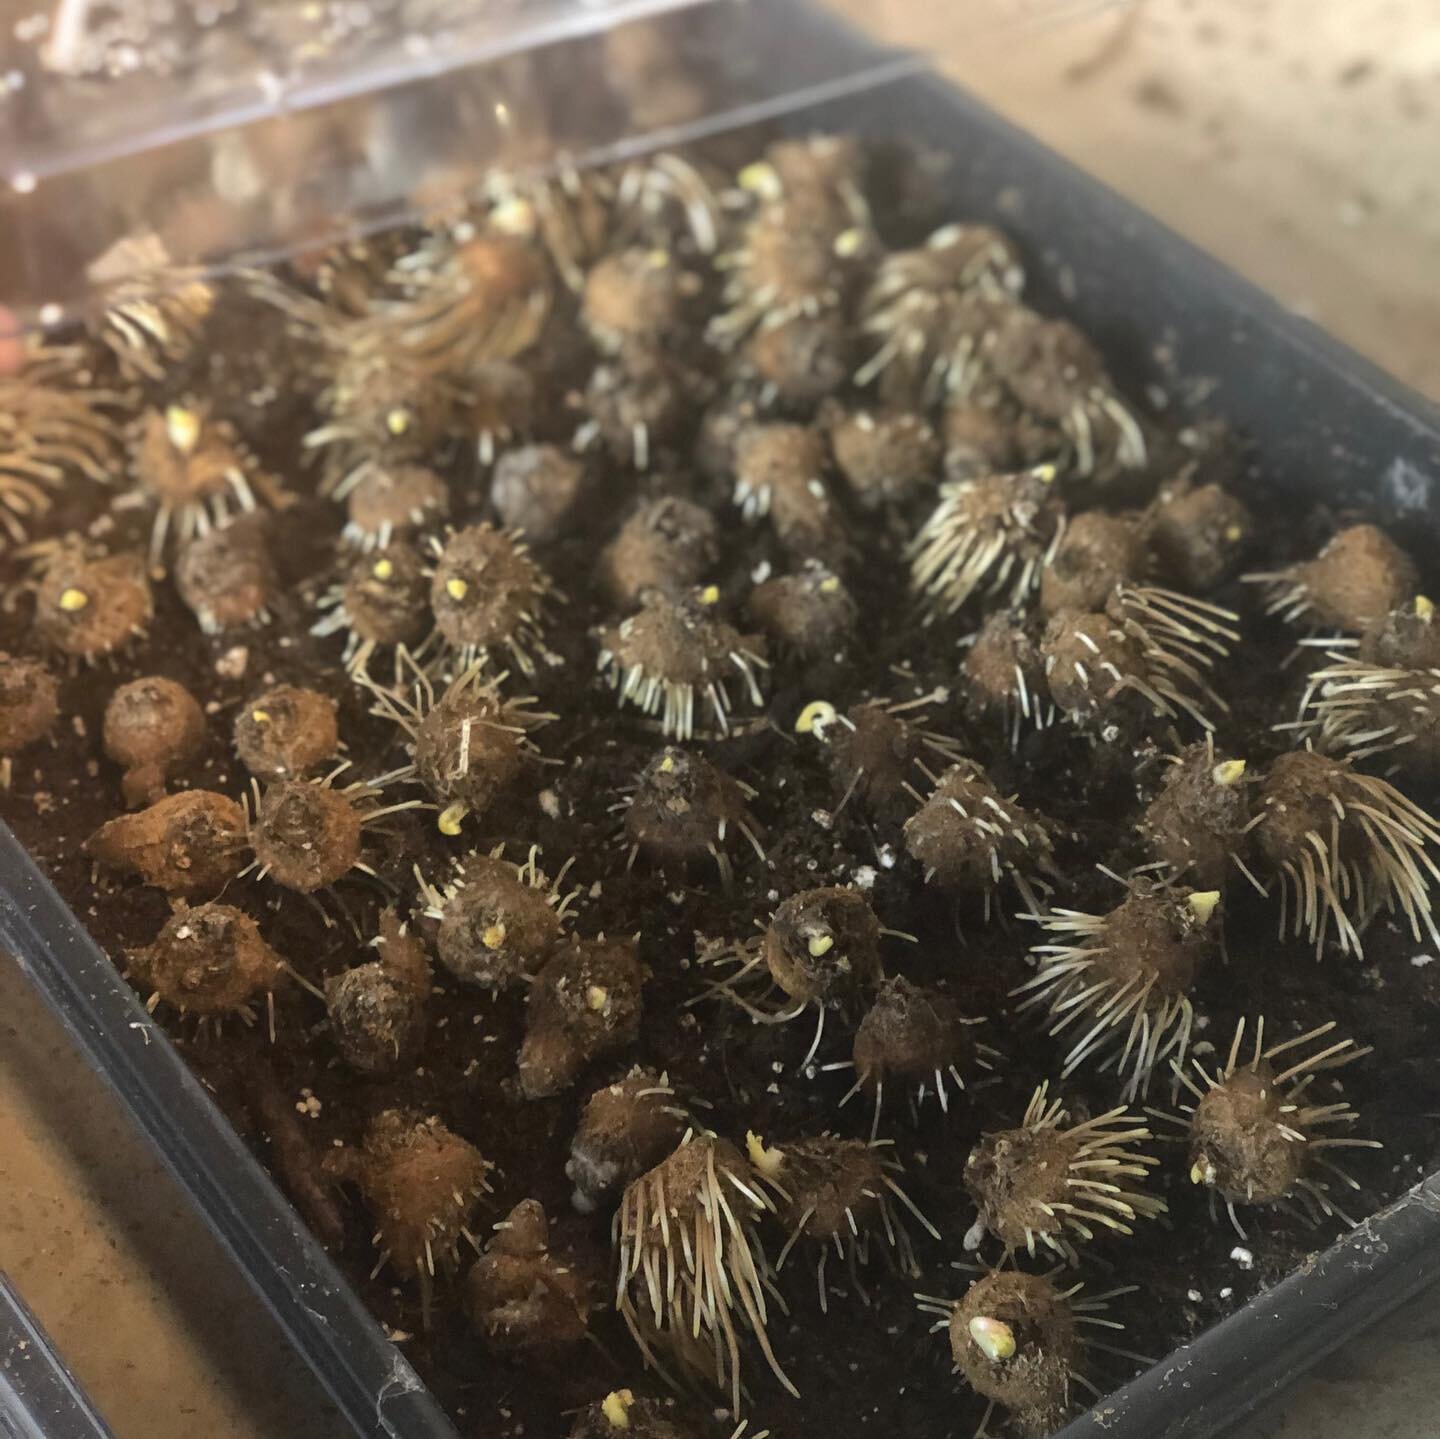 🌱Dahlia spam break 👏 Check out these weirdo anemone sprouting roots ✔️.
.
.
I soaked these corms 🌰 last Monday and put them in trays to pre-sprout and they are just doin their thang just right 👌🌱.
.
Swipe to see what they will look like in a few